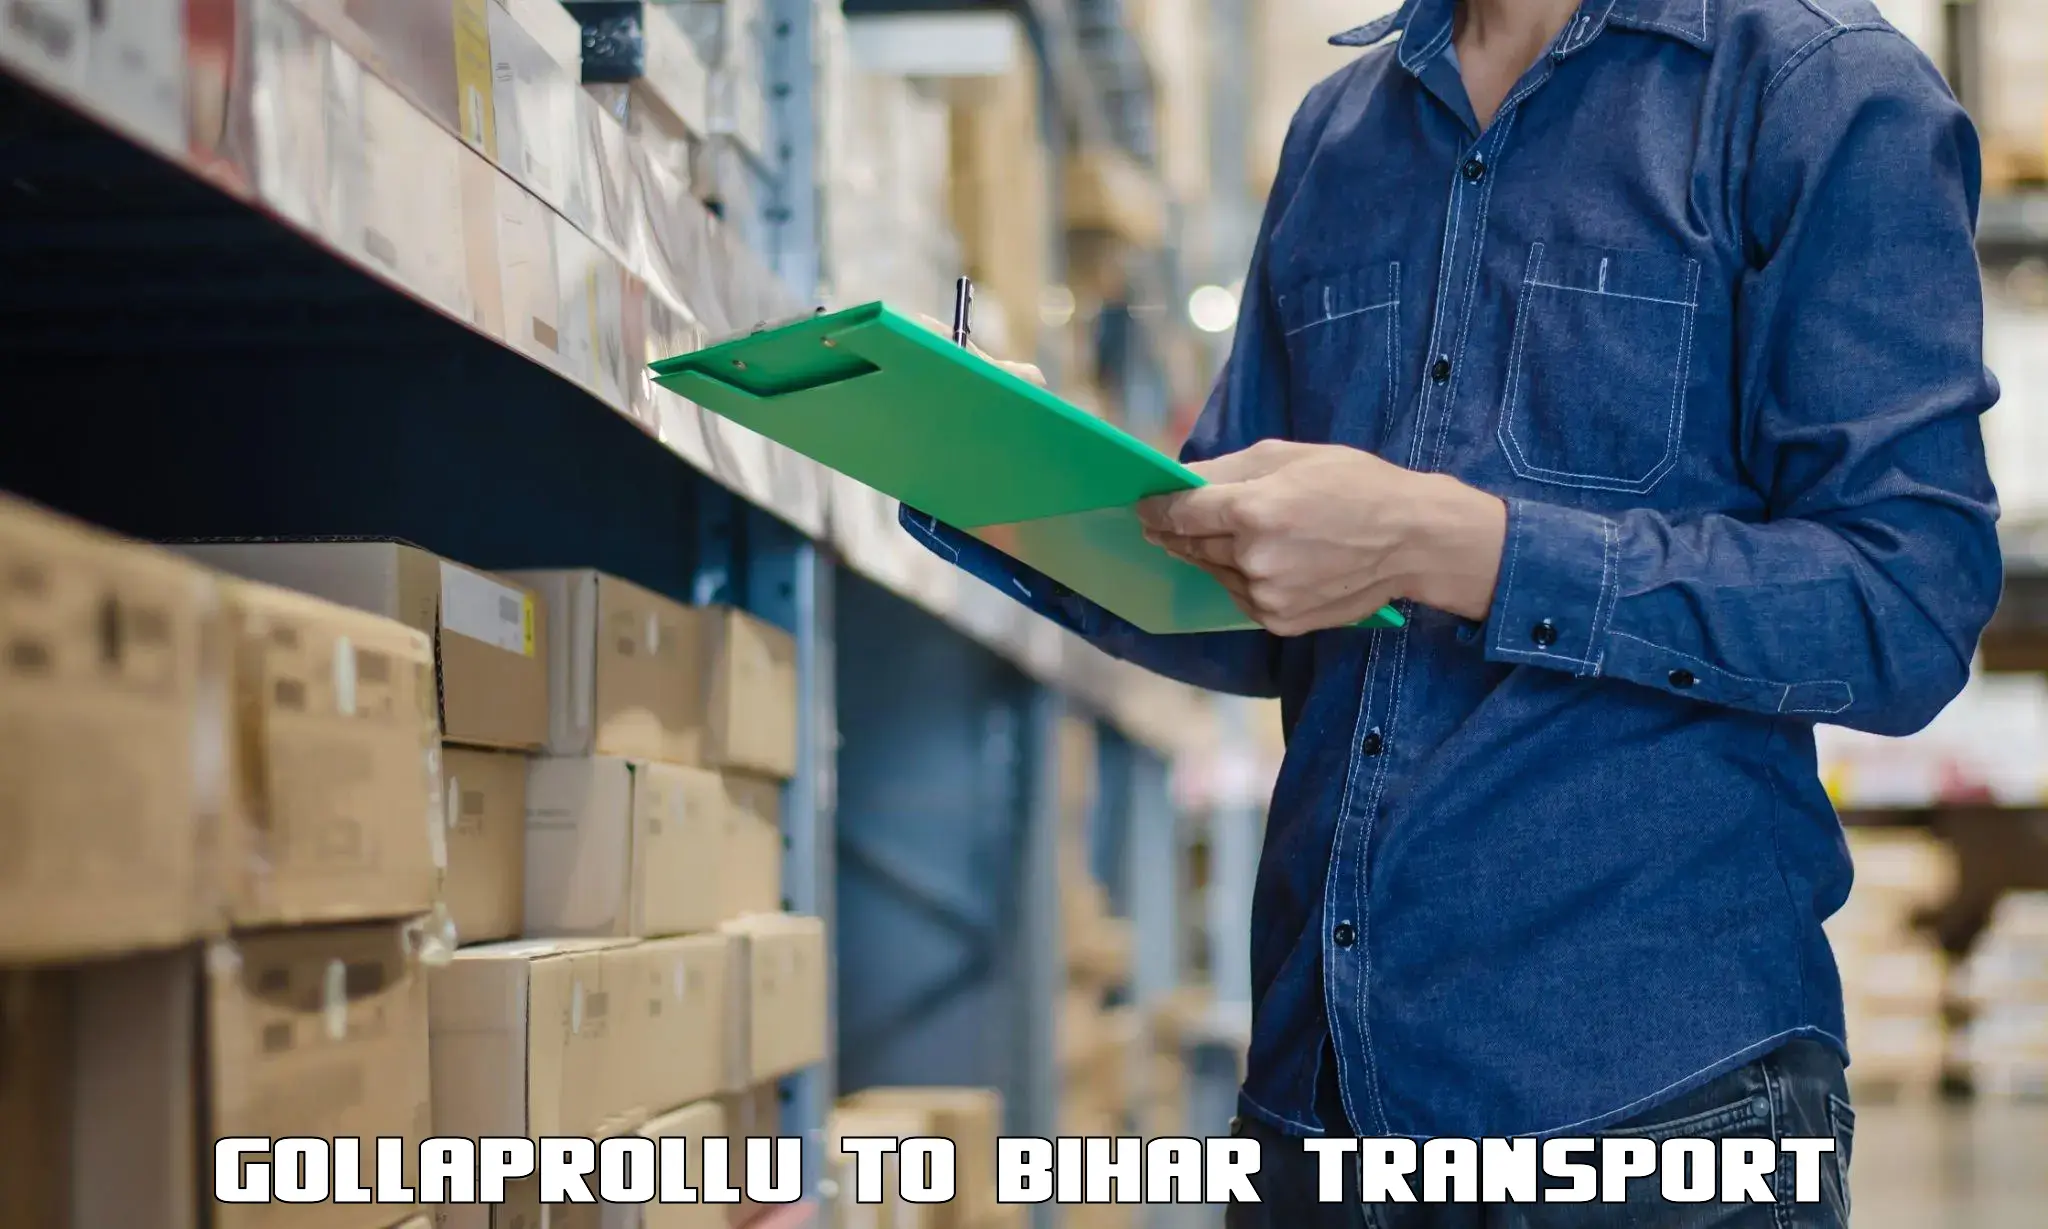 Shipping services Gollaprollu to IIIT Bhagalpur